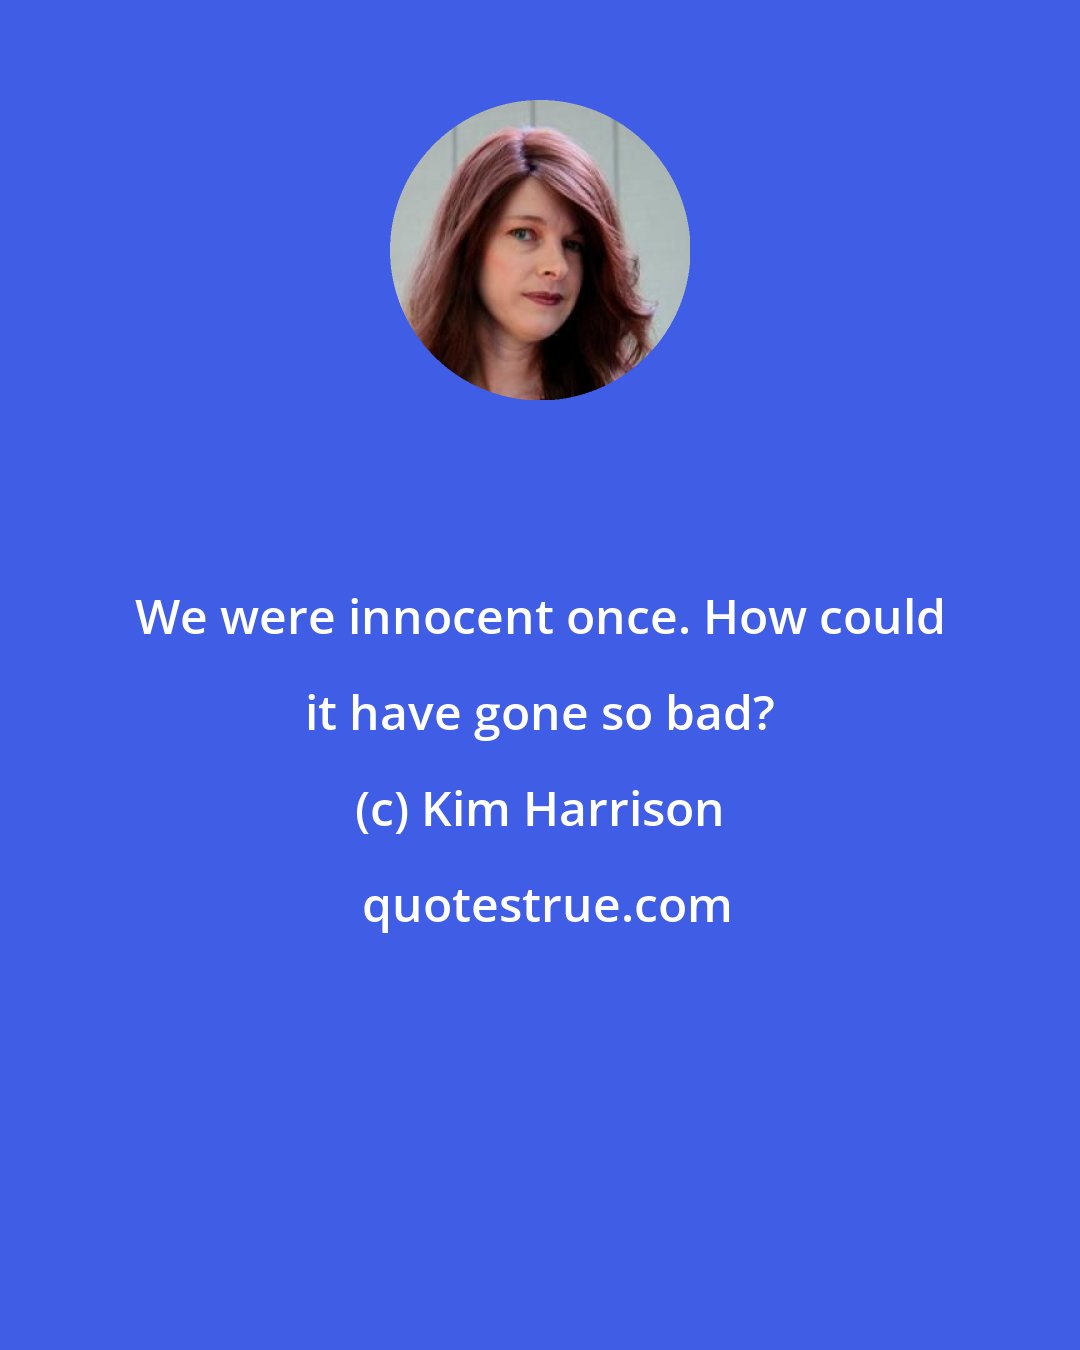 Kim Harrison: We were innocent once. How could it have gone so bad?